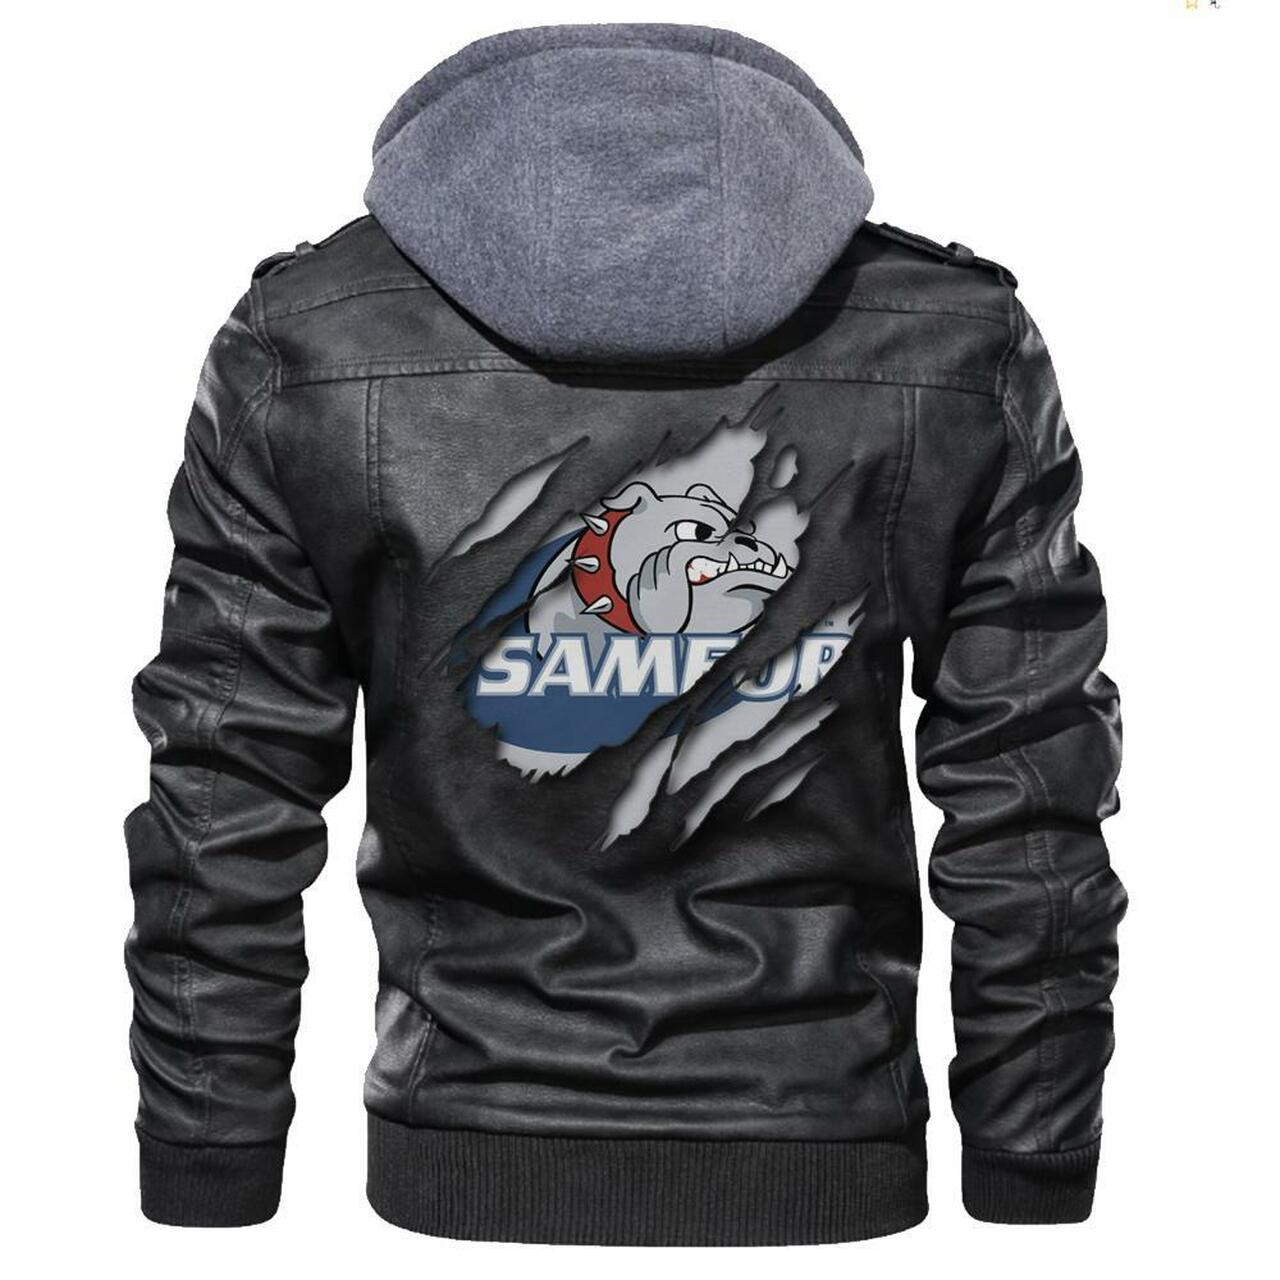 You can find Leather Jacket online at a great price 22